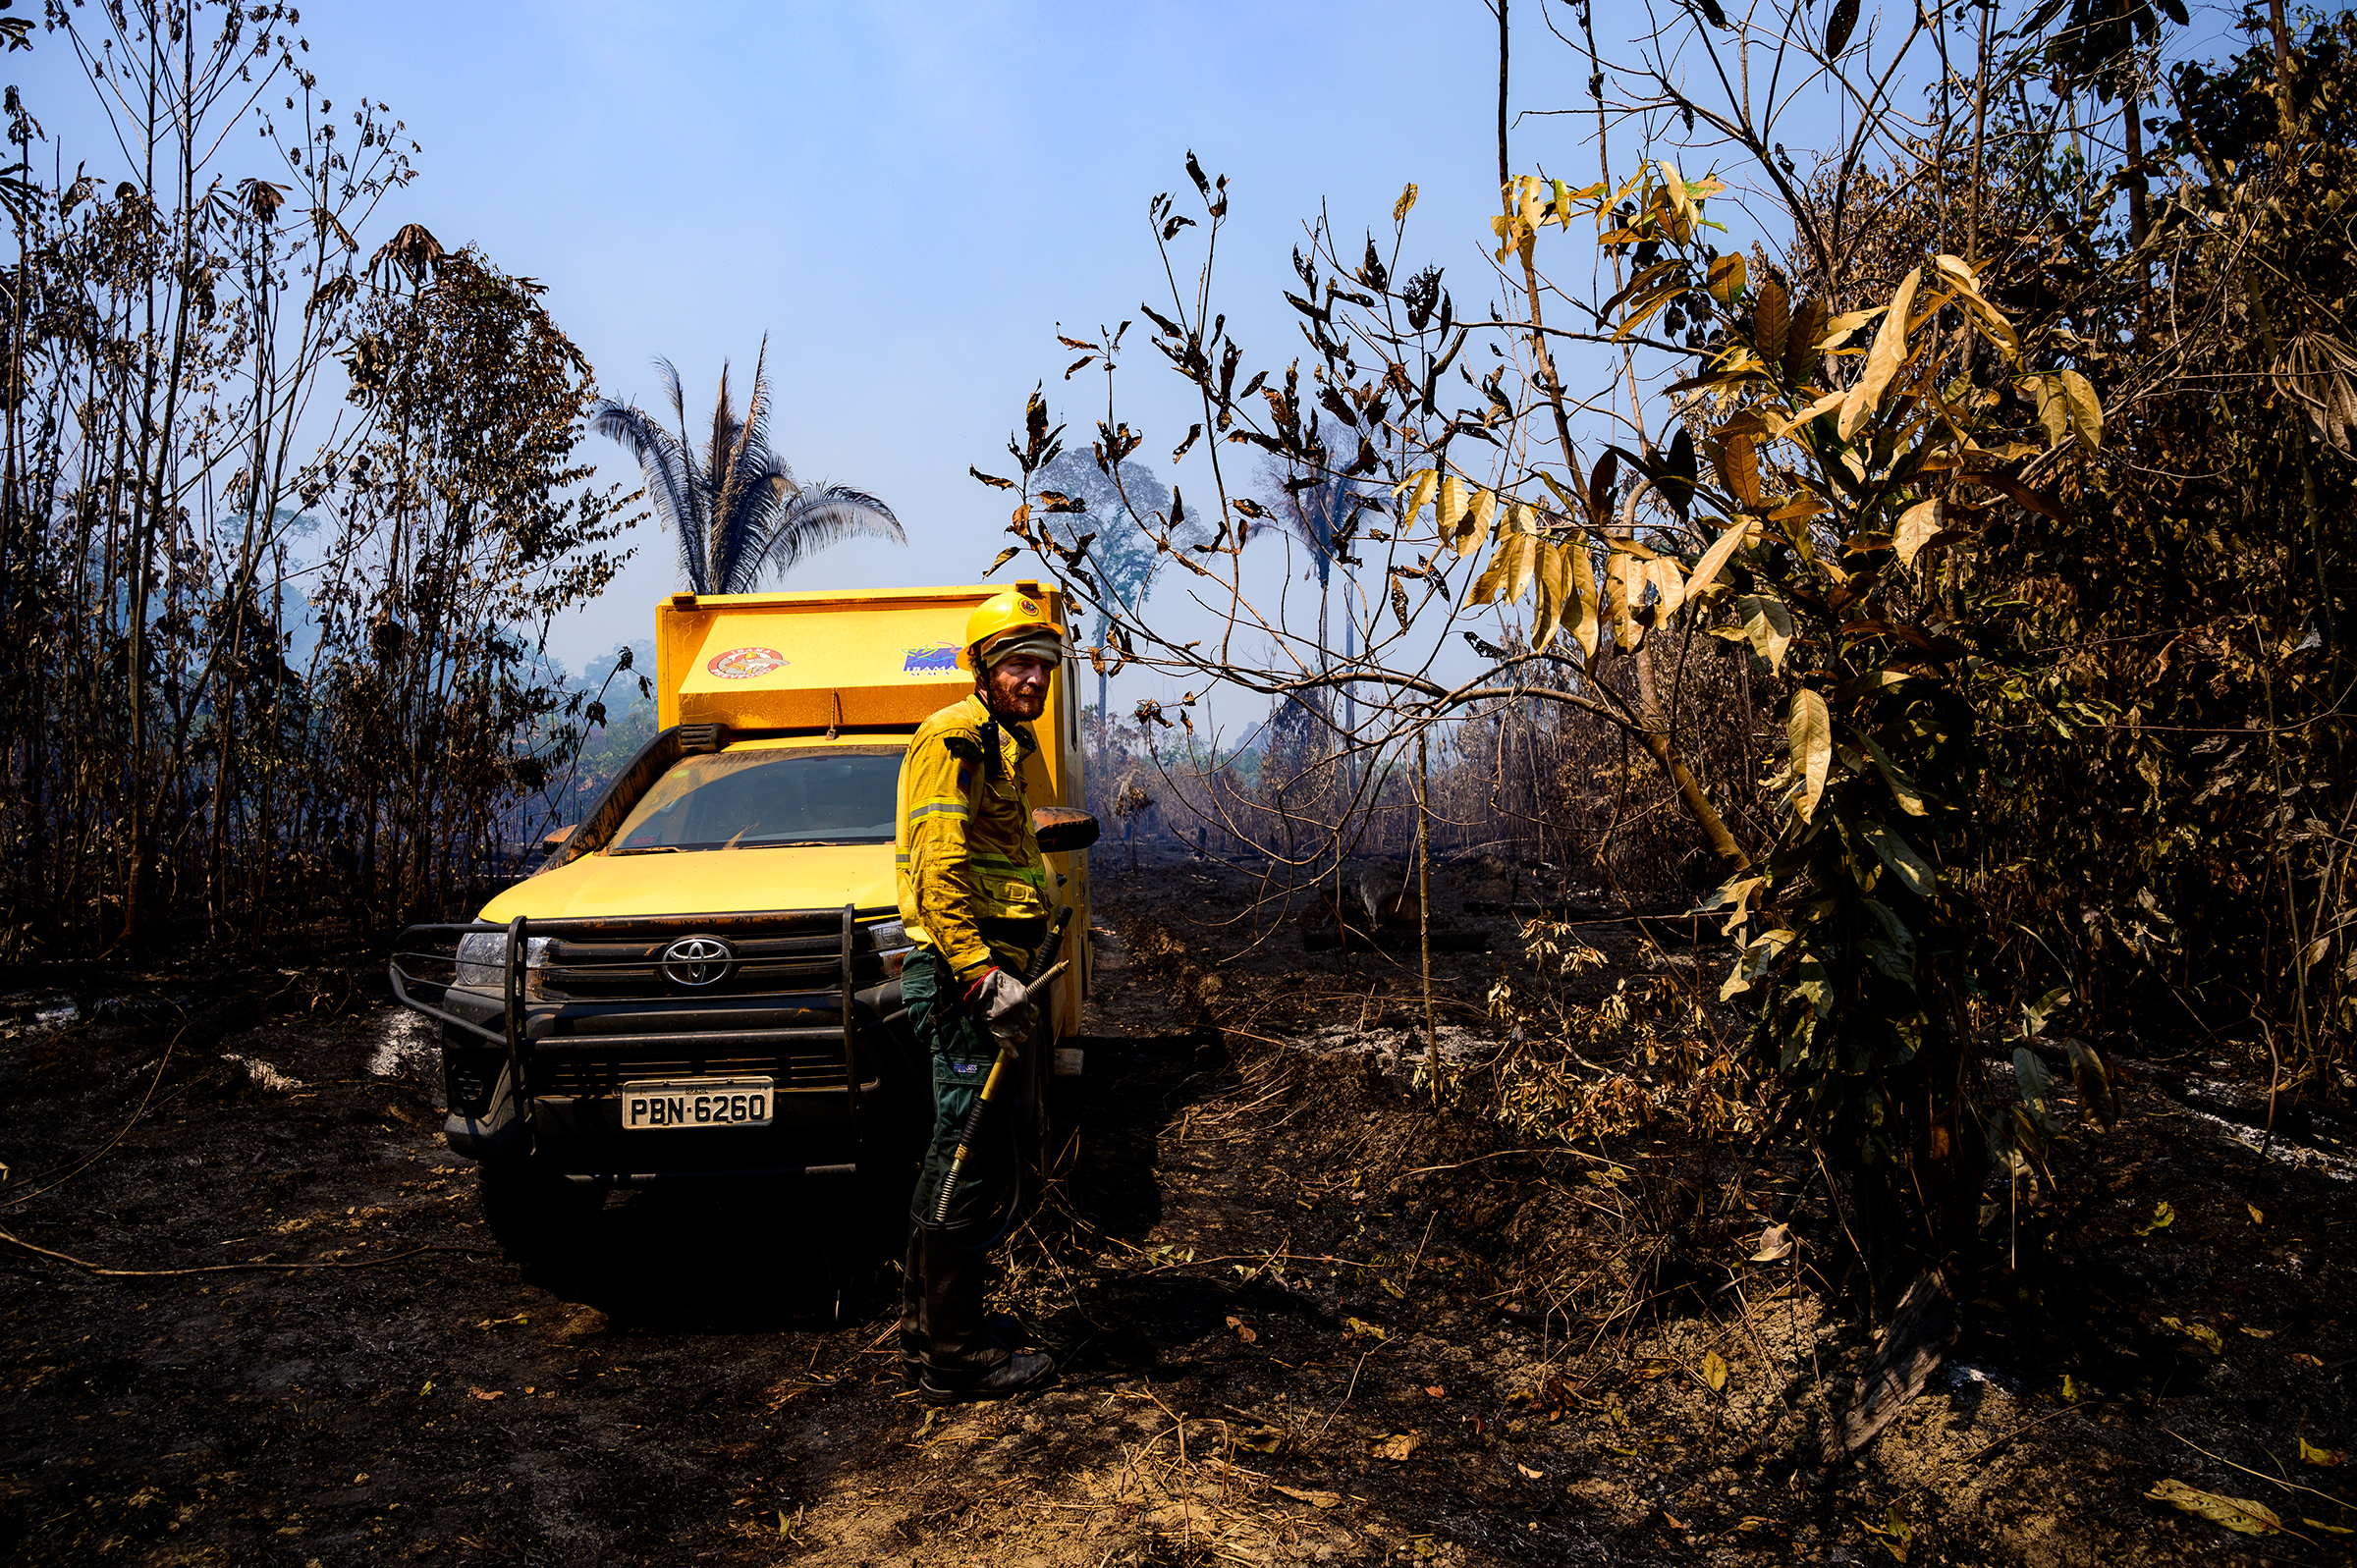 A worker and vehicle from Brazil's environmental agency, IBAMA, in a recently burned section of forest in the Vila Nova Samuel region on Aug. 28. (Sebastián Liste—NOOR for TIME)